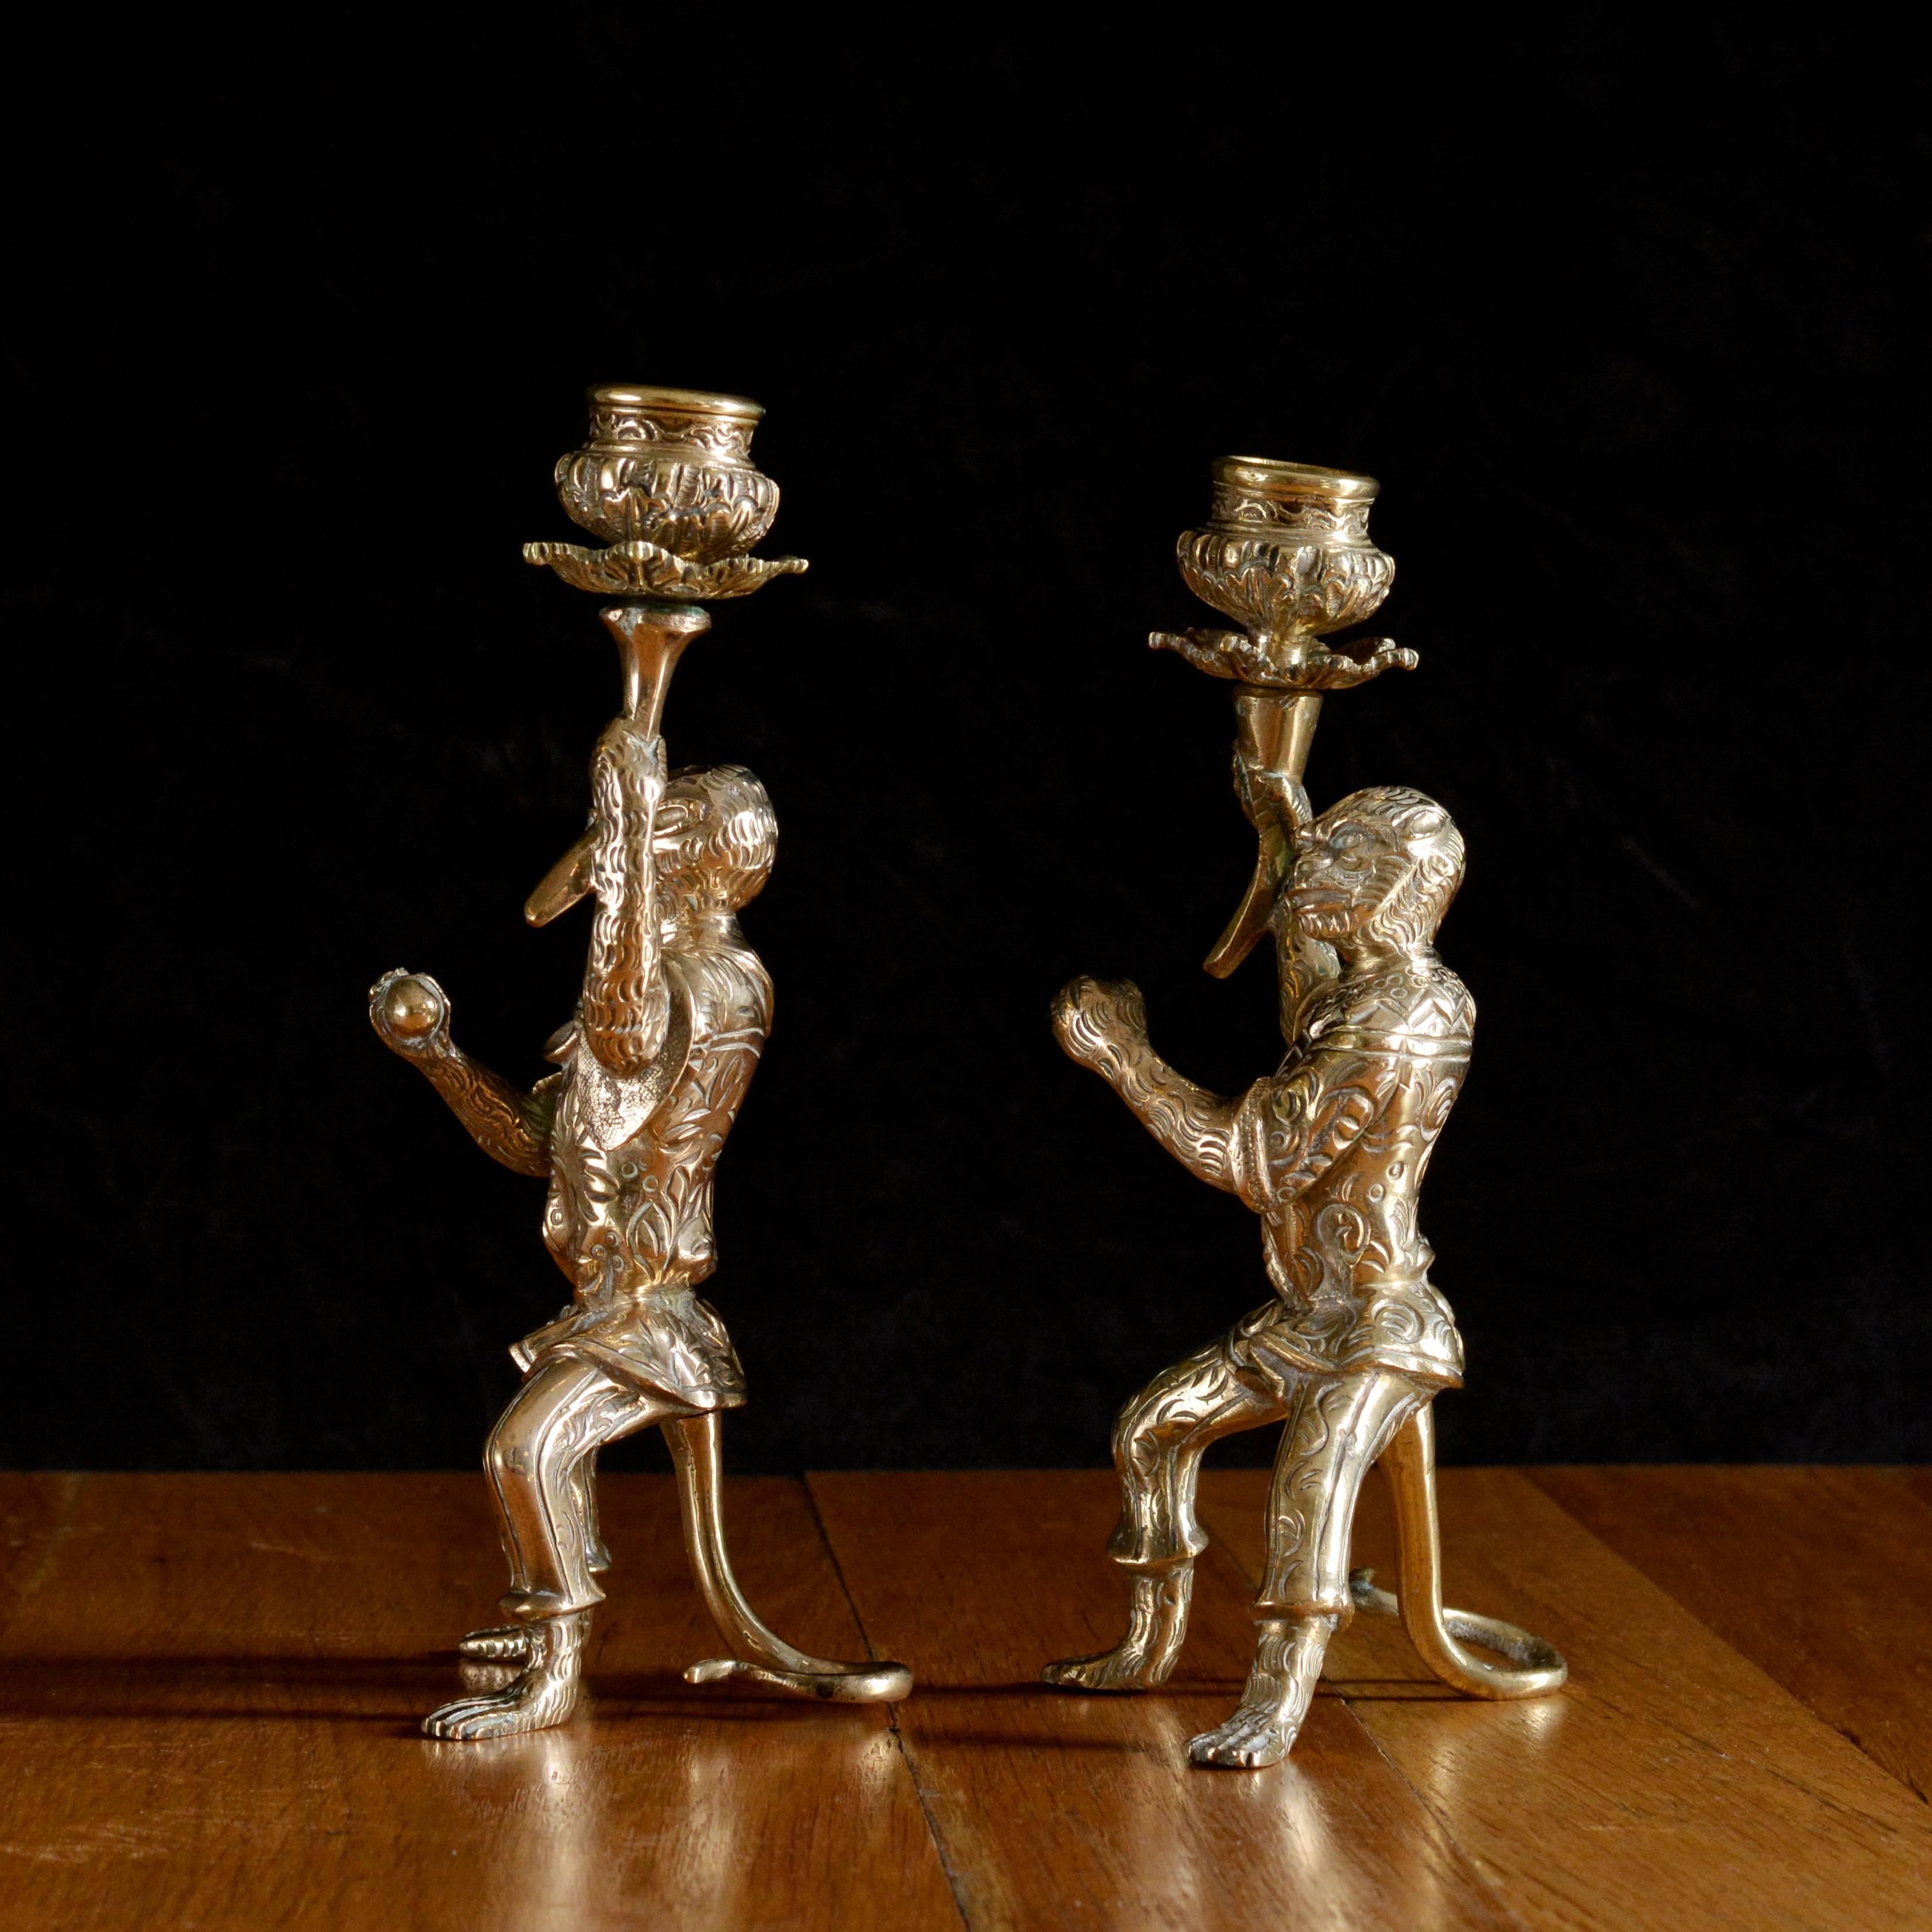 A pair of late 19th century bronze monkey candlesticks, possibly Italian, each holding aloft torches, each monkey dressed in jester outfit in seated position supported by tail.

Available to view at Brunswick House.

Measures: 22.5cm (8¾